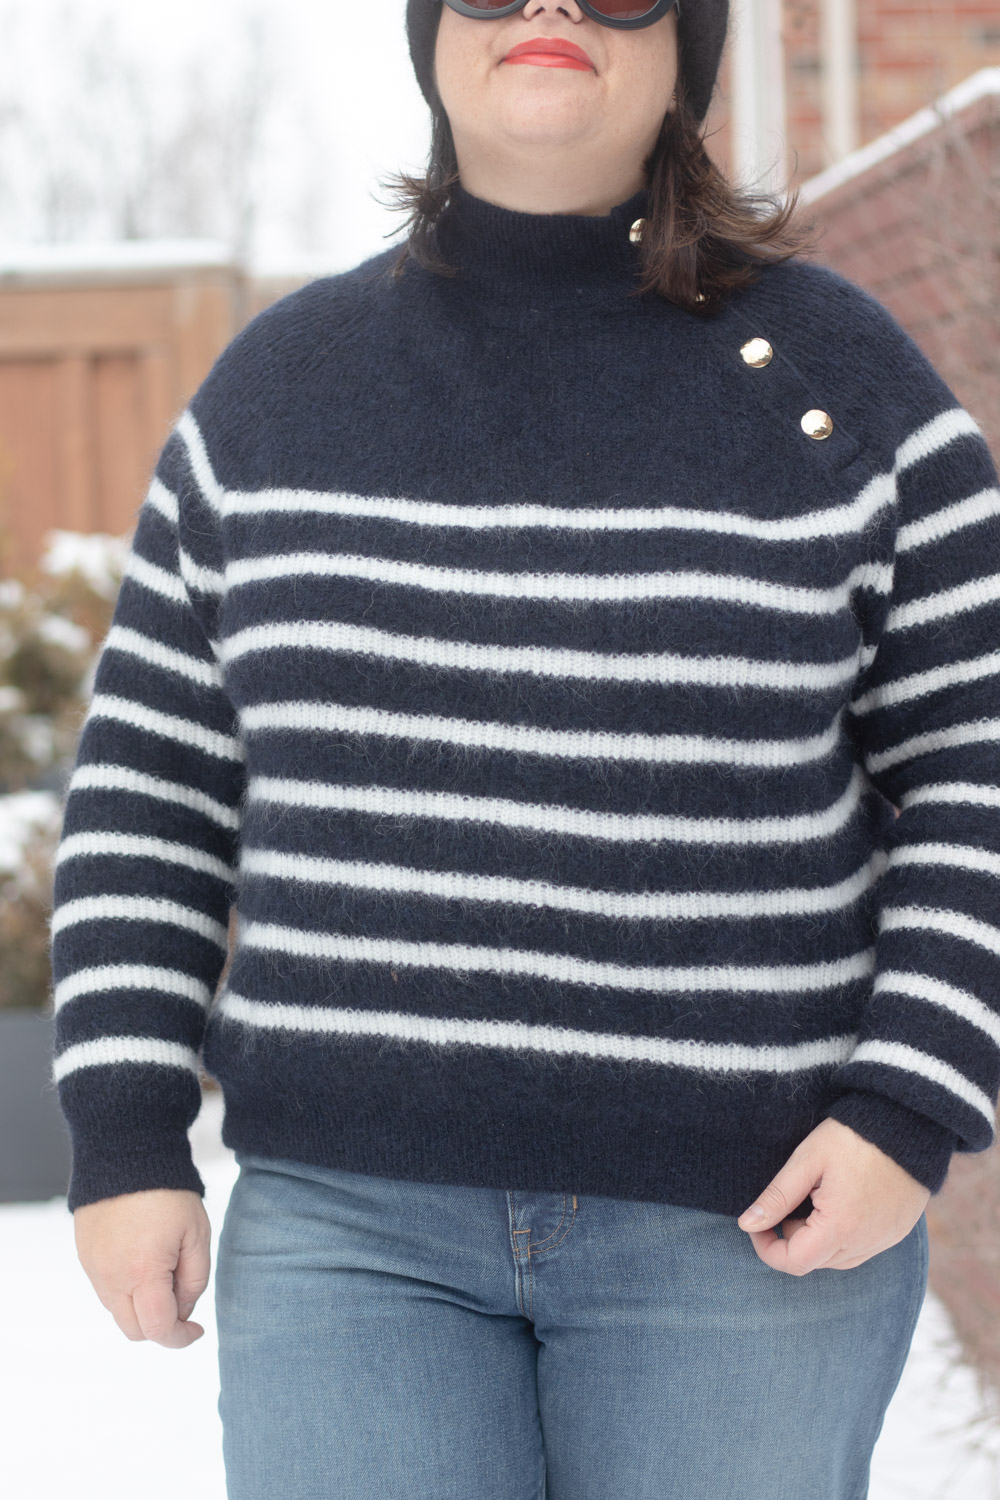 Sezane Trudy Jumper review